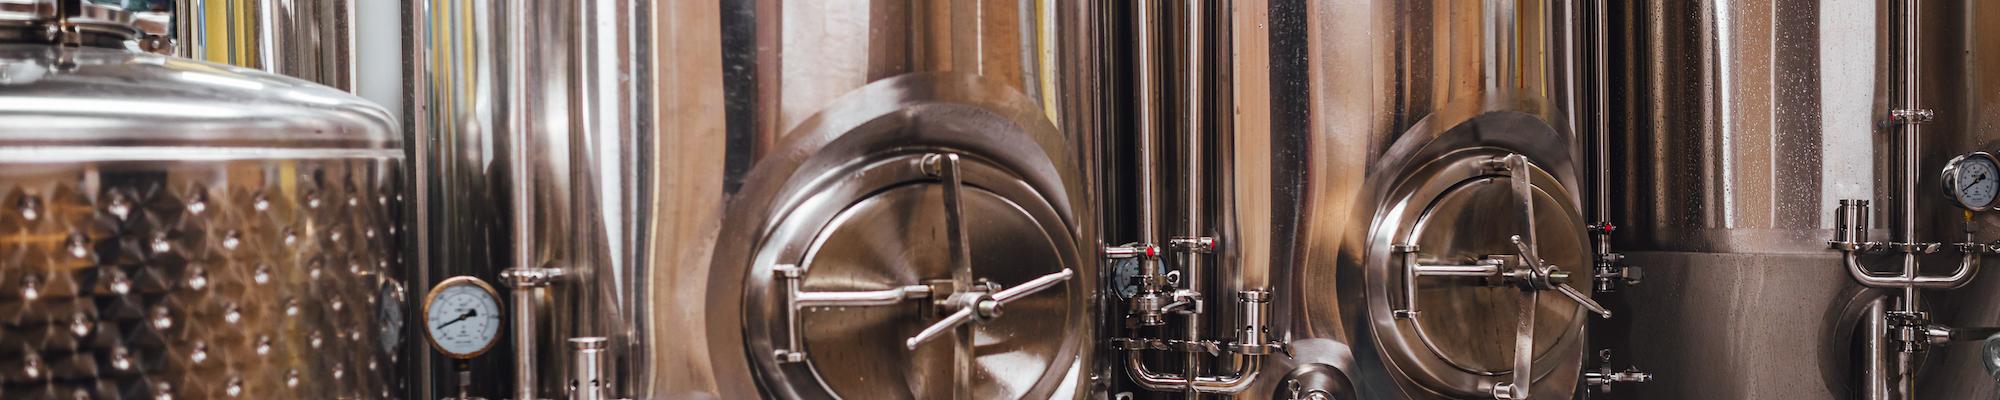 Maintaining Craft Brew Quality with Laminar Flow Hoods - Banner